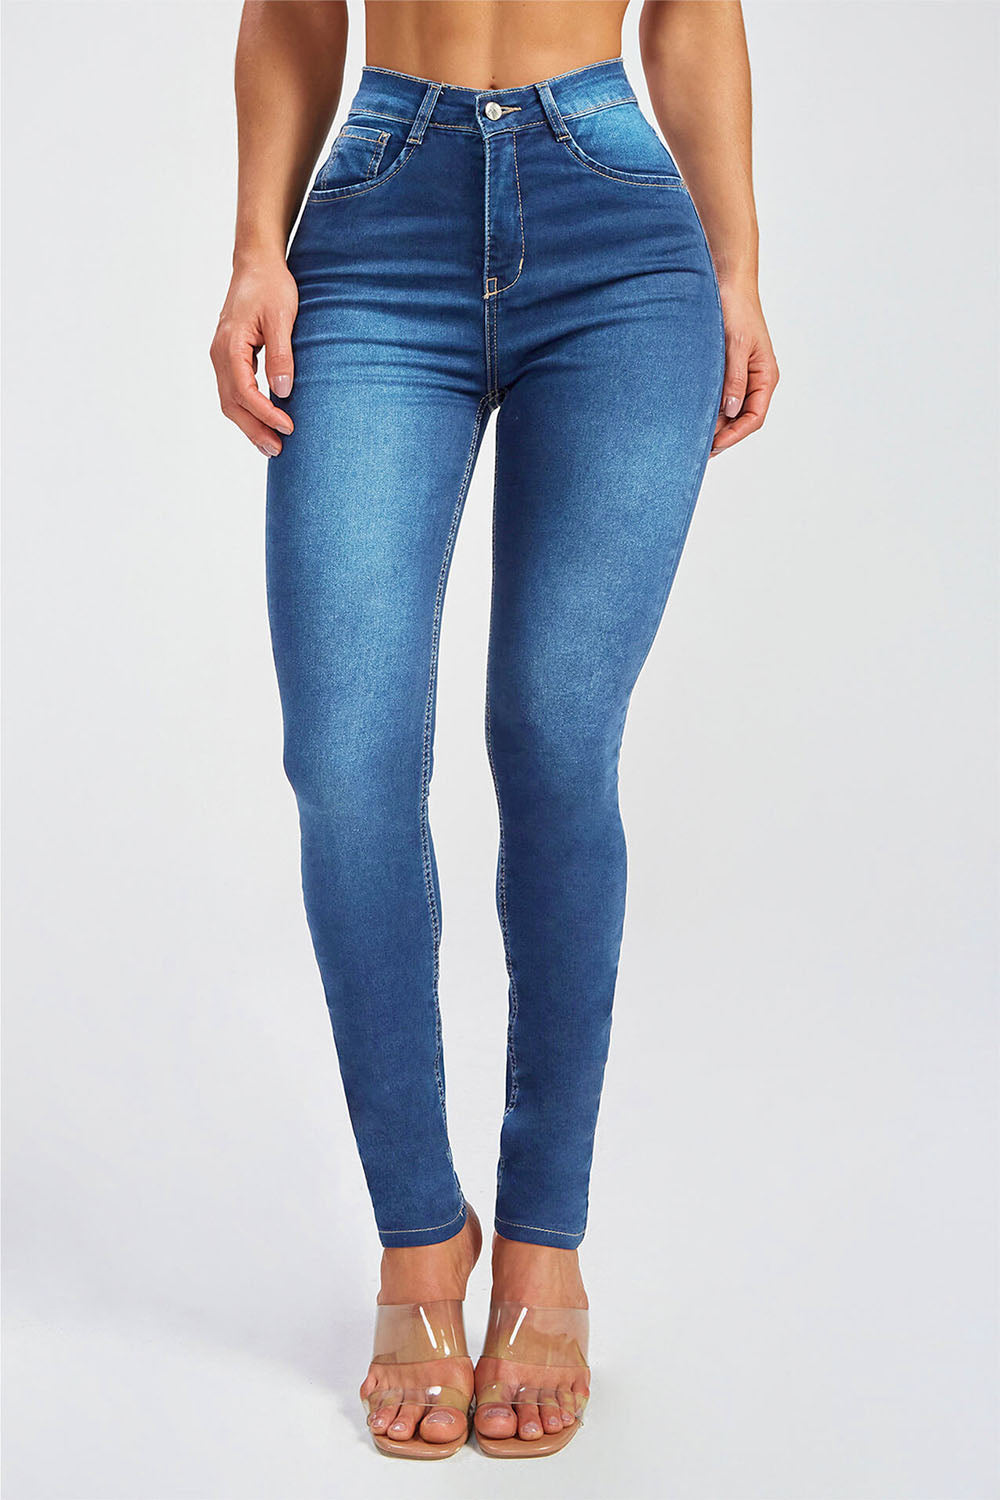 Button Fly Skinny Jeans Pants